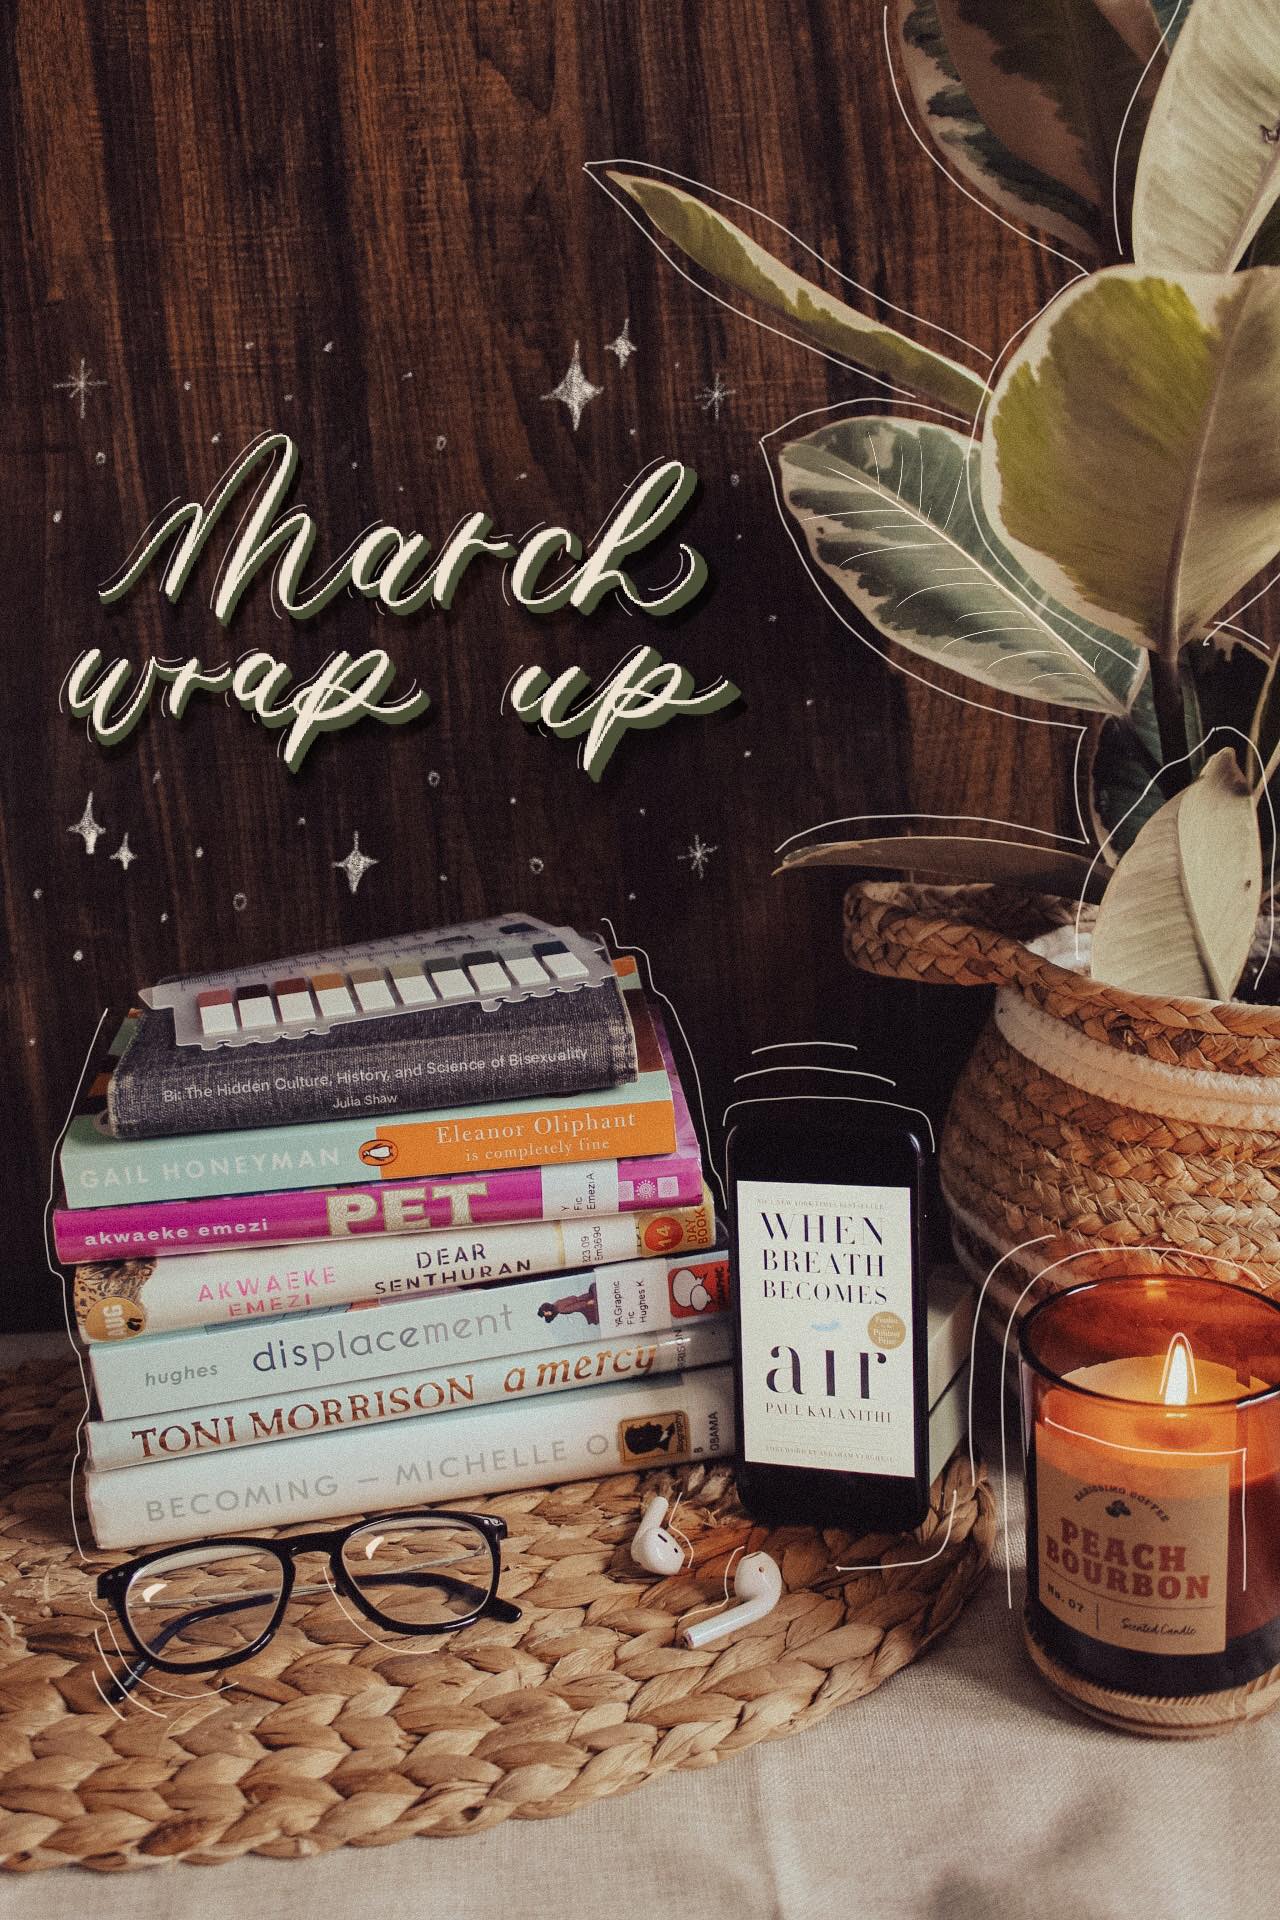 A stack of books next to an audiobook, candle, and houseplant with a dark background with the words "March Wrap-up" on it. Bookstack includes Becoming by Michelle Obama, Displacement by Kiku Hughes, Pet by Akwaeke Emezi, Eleanor Oliphant is Completely Fine by Gail Honeyman, Dear Senthuran by Akwaeke Emezi, Bi by Julia Shaw, and When Breath Becomes Air by Paul Kalanithi.